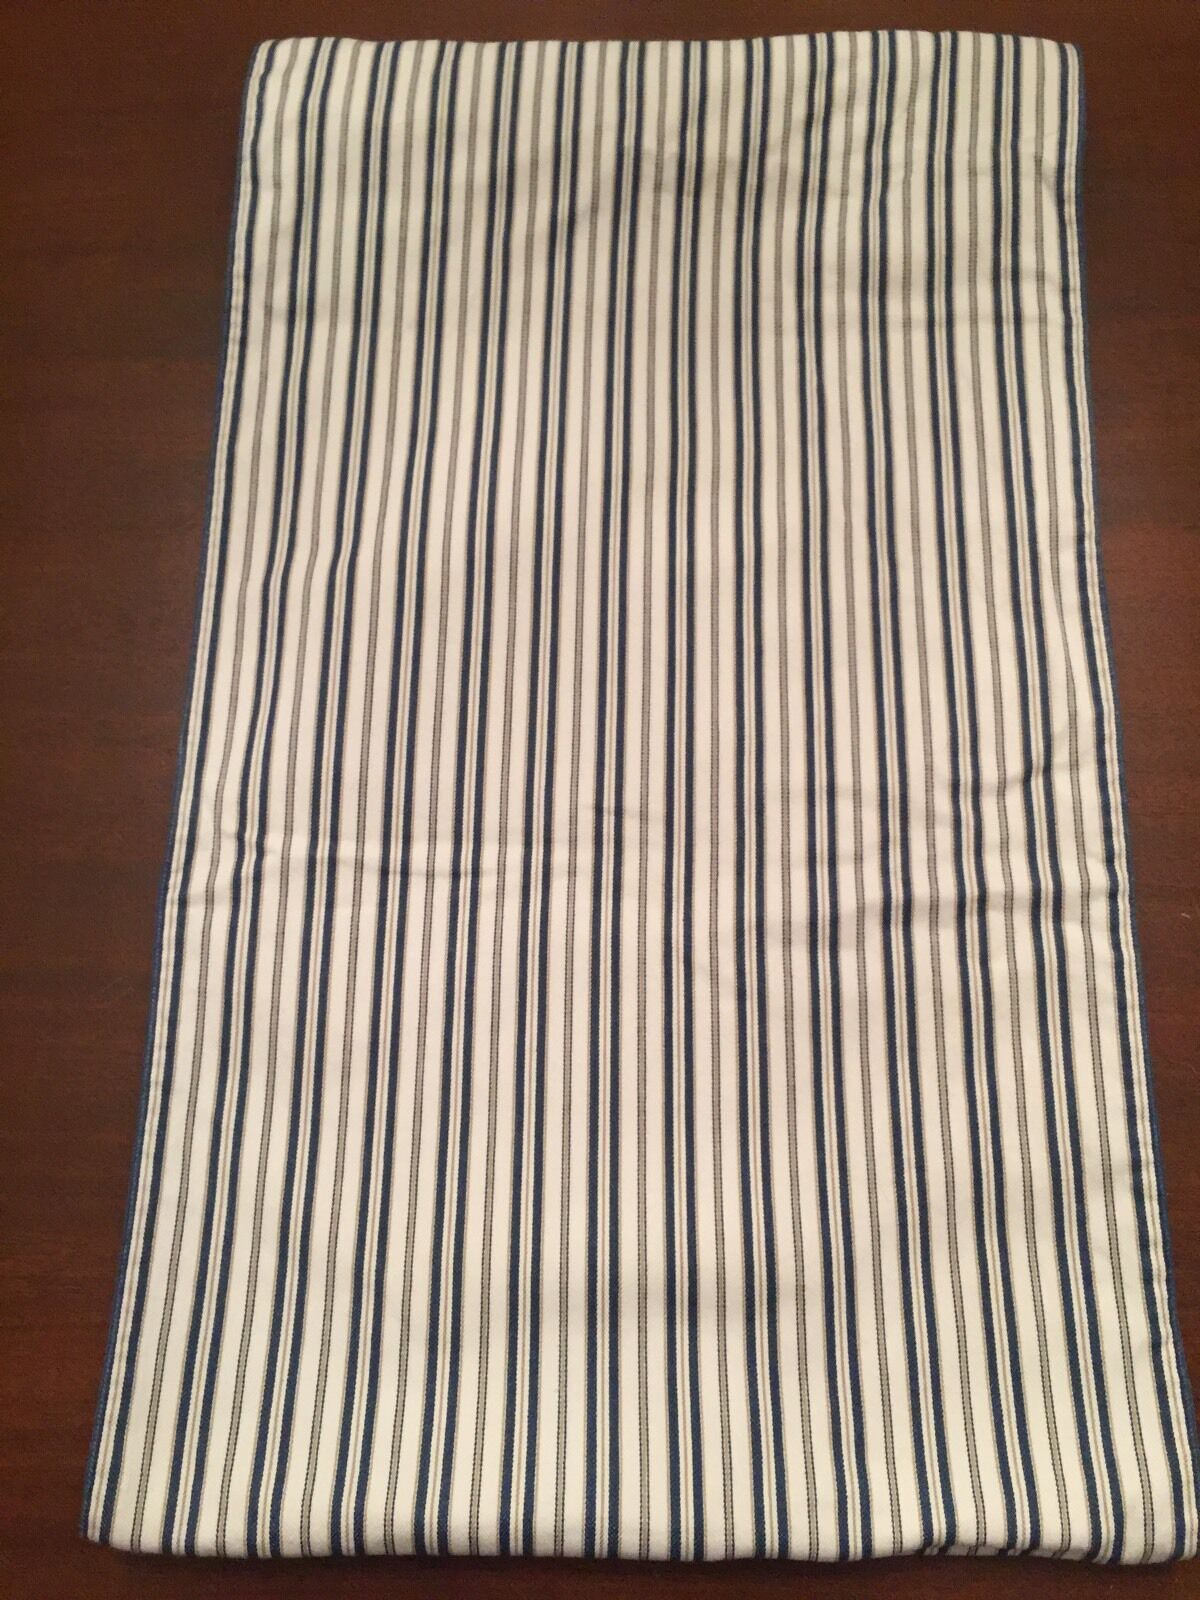 Pottery Barn Table Runner And Placemats (6) EEUC Blue/white